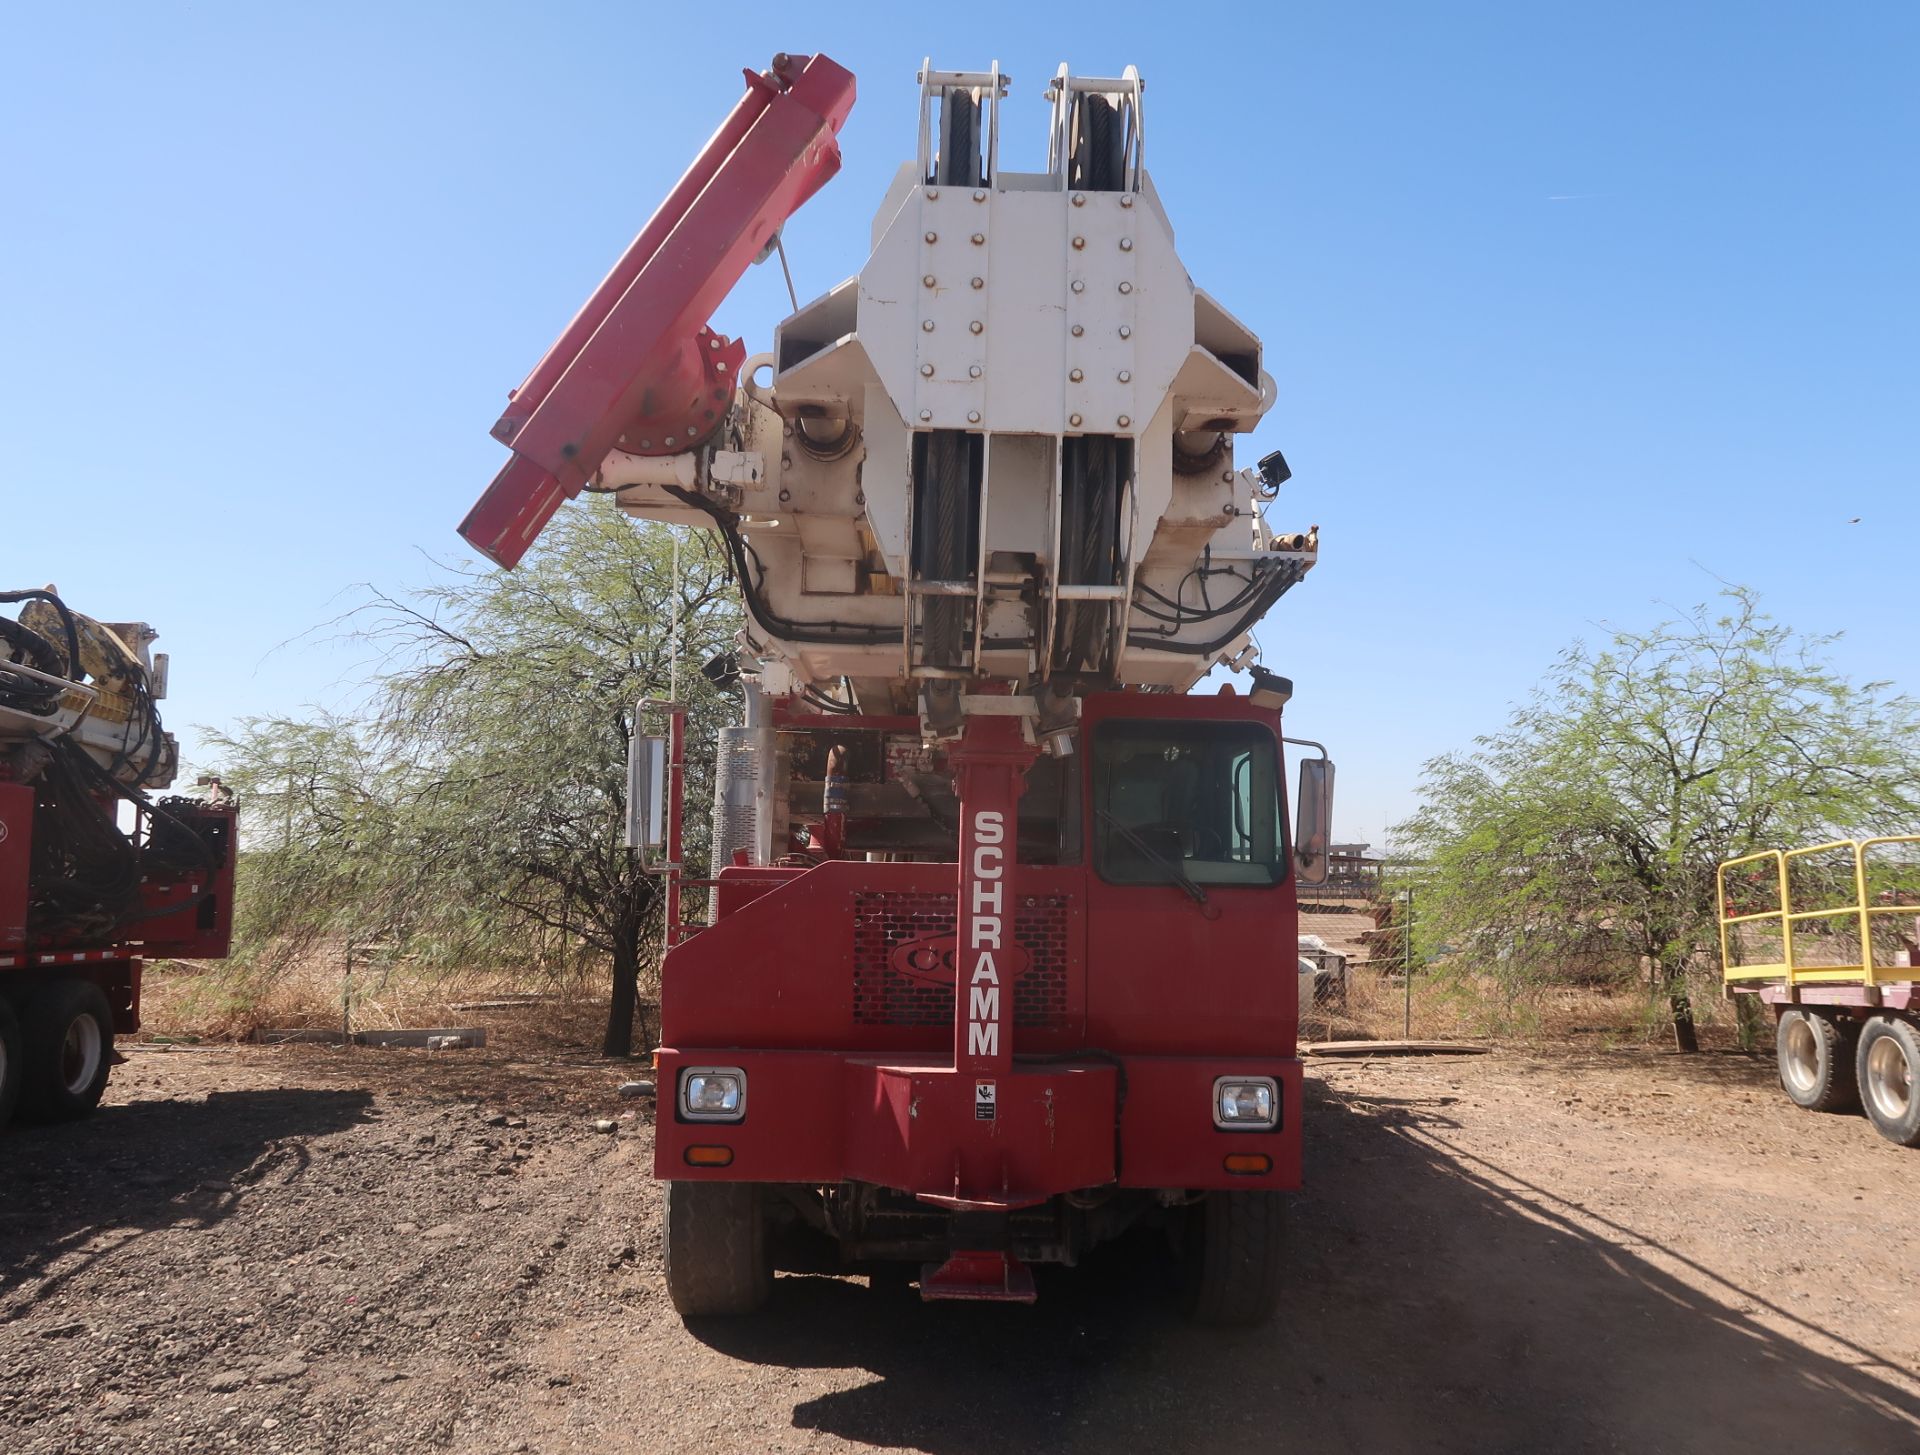 2006 SCHRAMM T-130XD DRILL RIG, SN. J130-0154 MOUNTED ON CRANE CARRIER, VIN. 1CYDGV6846T047562 - Image 3 of 19